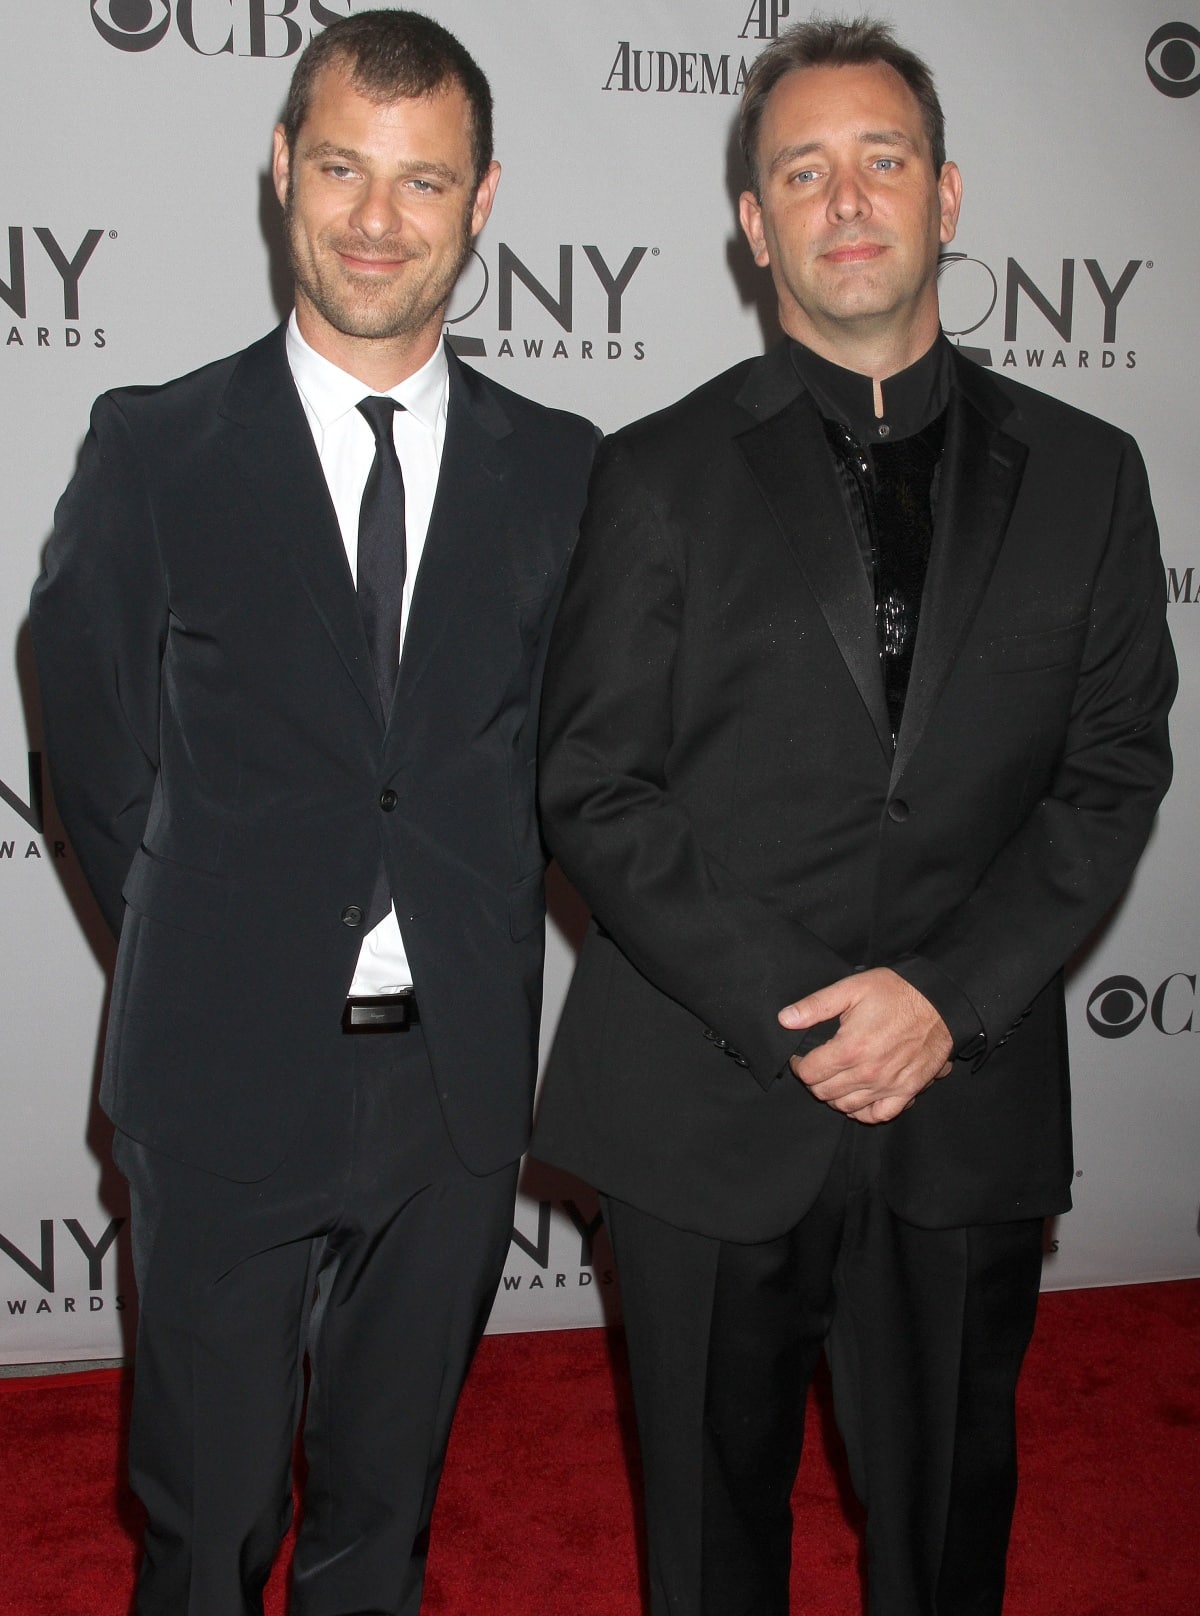 Trey Parker and Matt Stone met in college and have been best friends ever since